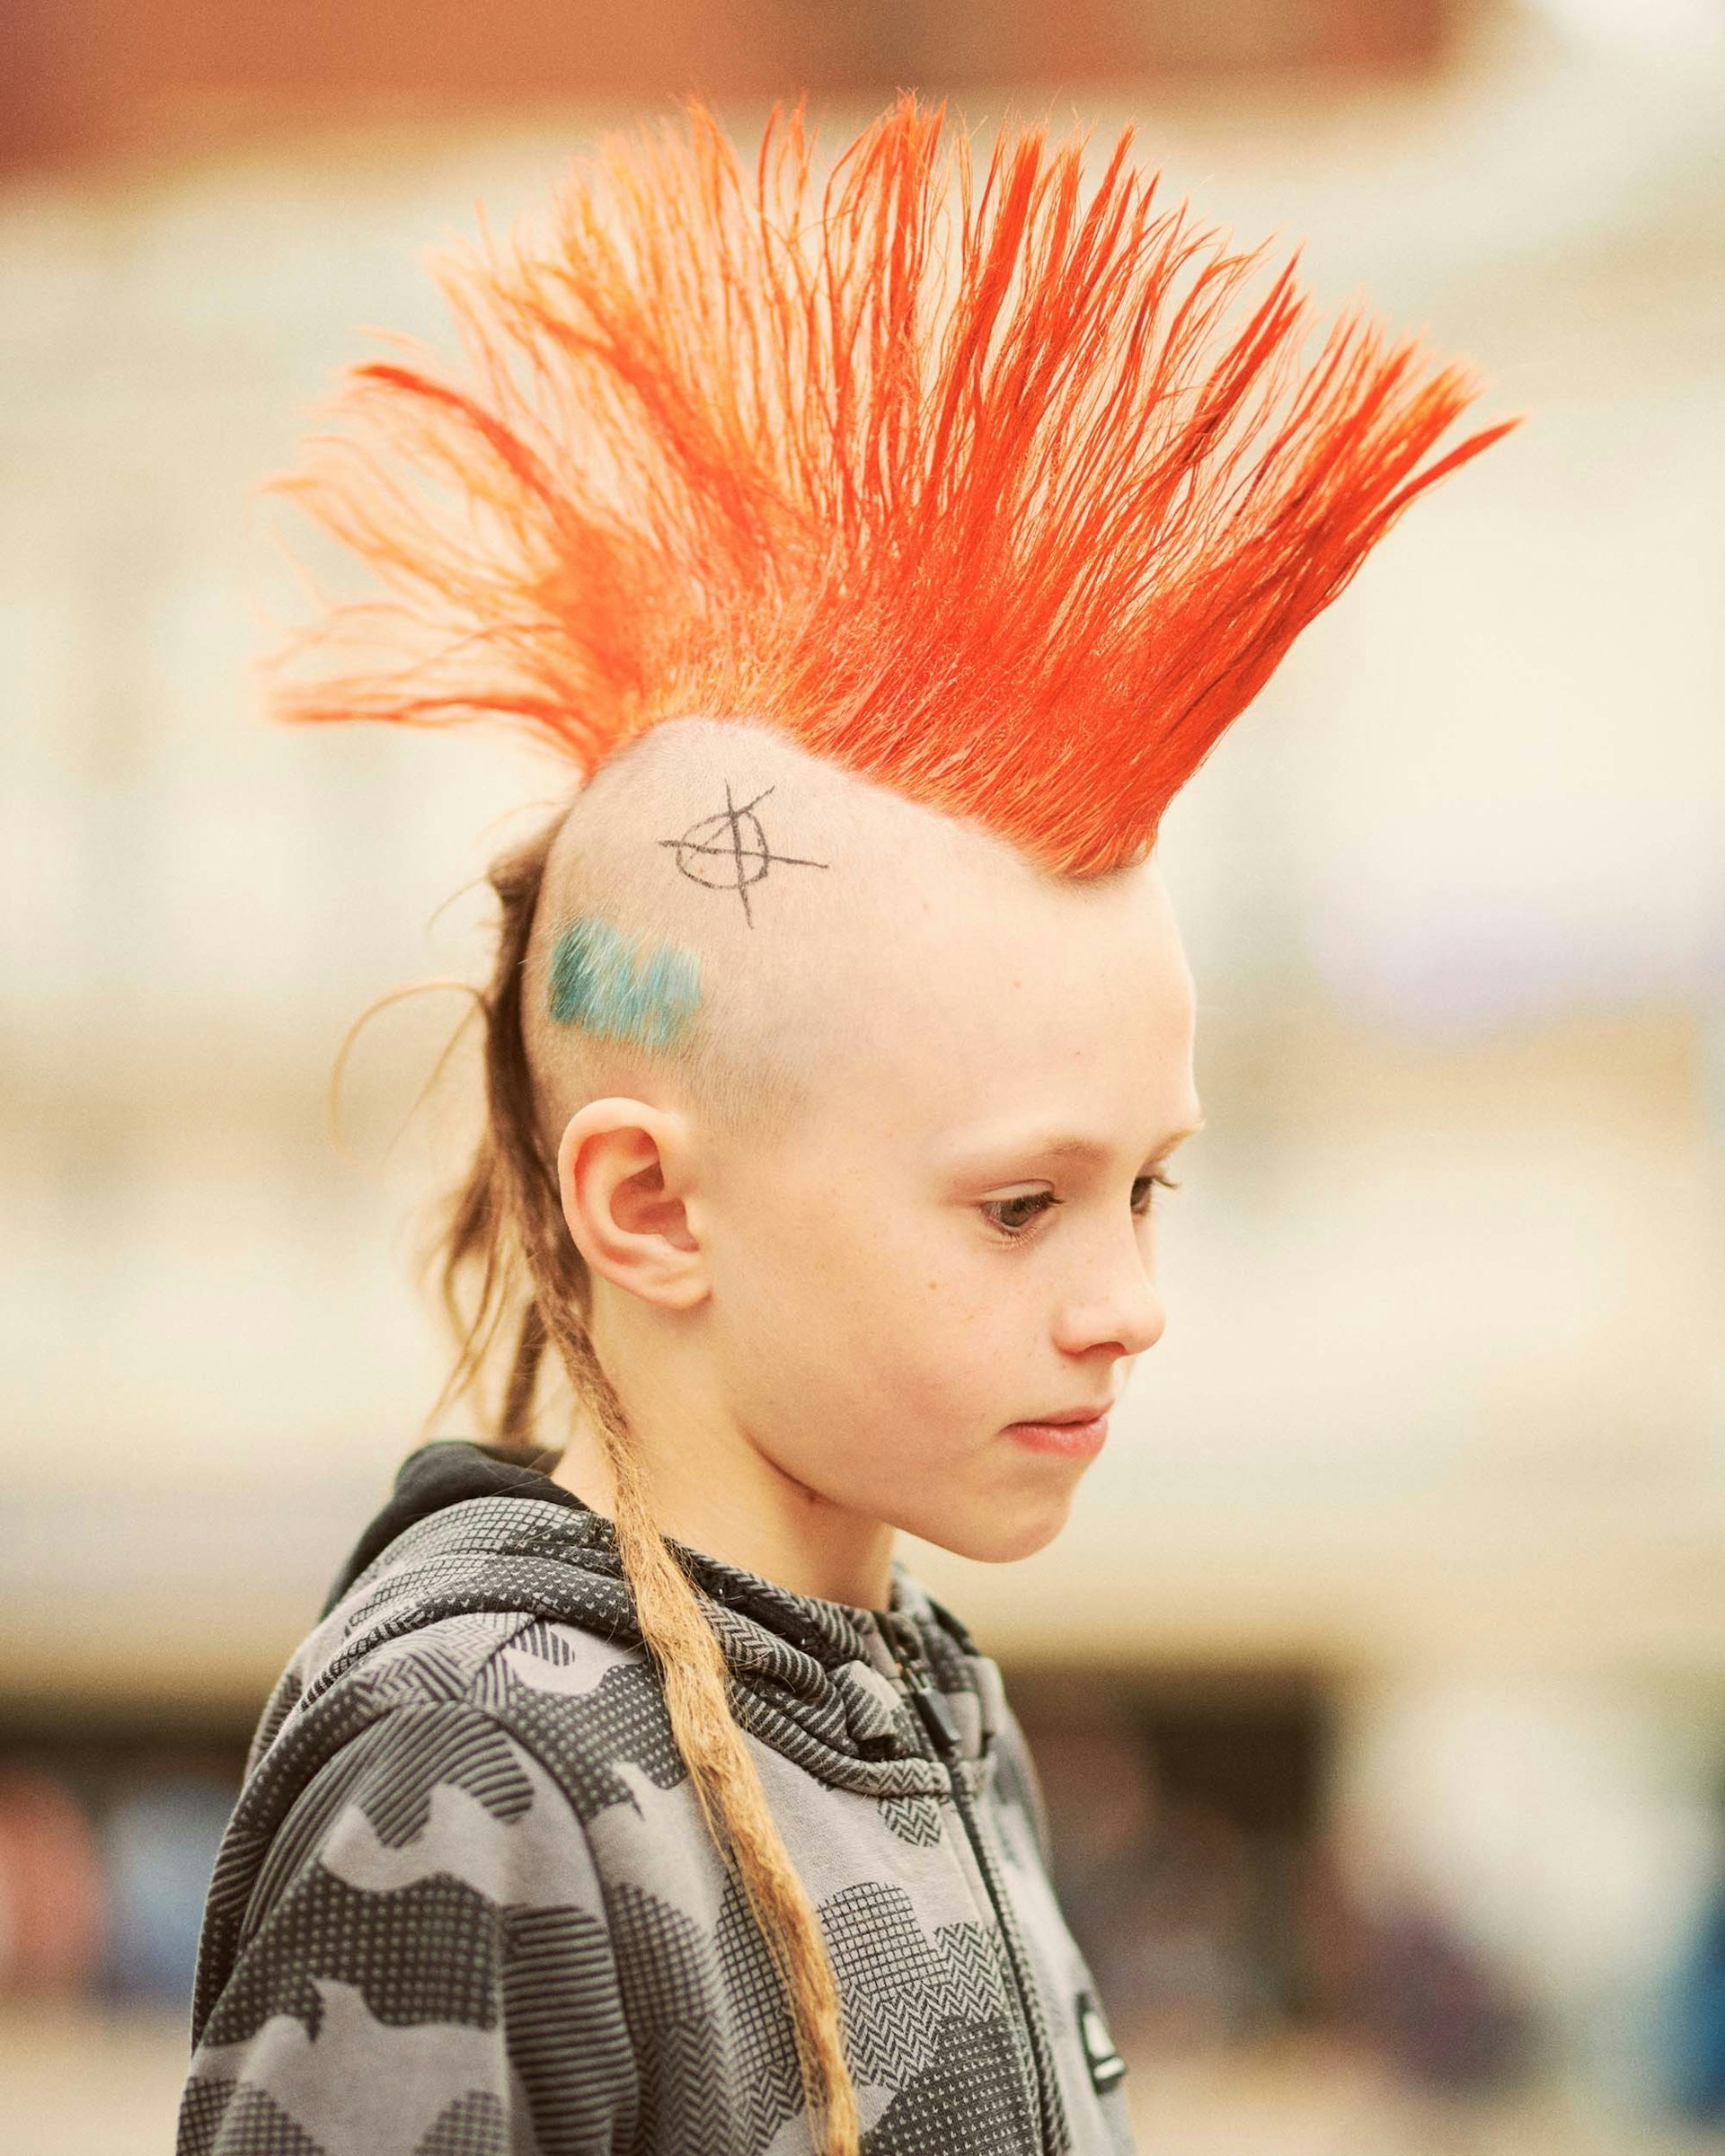 Unruly portraits of punks at Blackpool's Rebellion Festival…